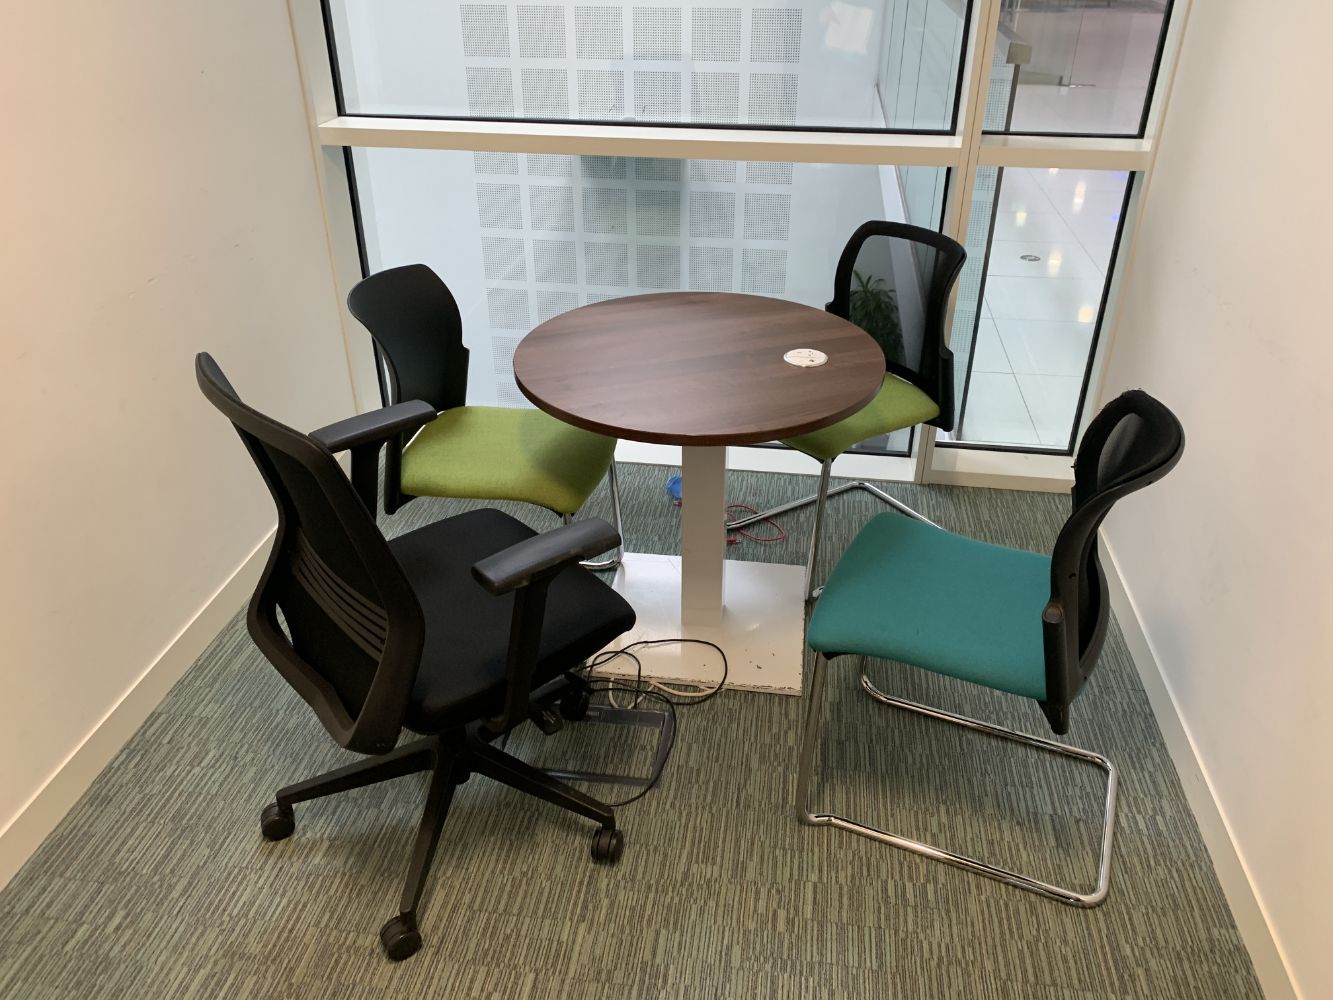 BENCHMARK LUXURY OFFICE FURNITURE CHAIRS, DESKS & MORE - ON BEHALF OF A MAJOR INSURANCE BROKER - COLLECTION ONLY LEEDS WEDNESDAY 25TH AUGUST